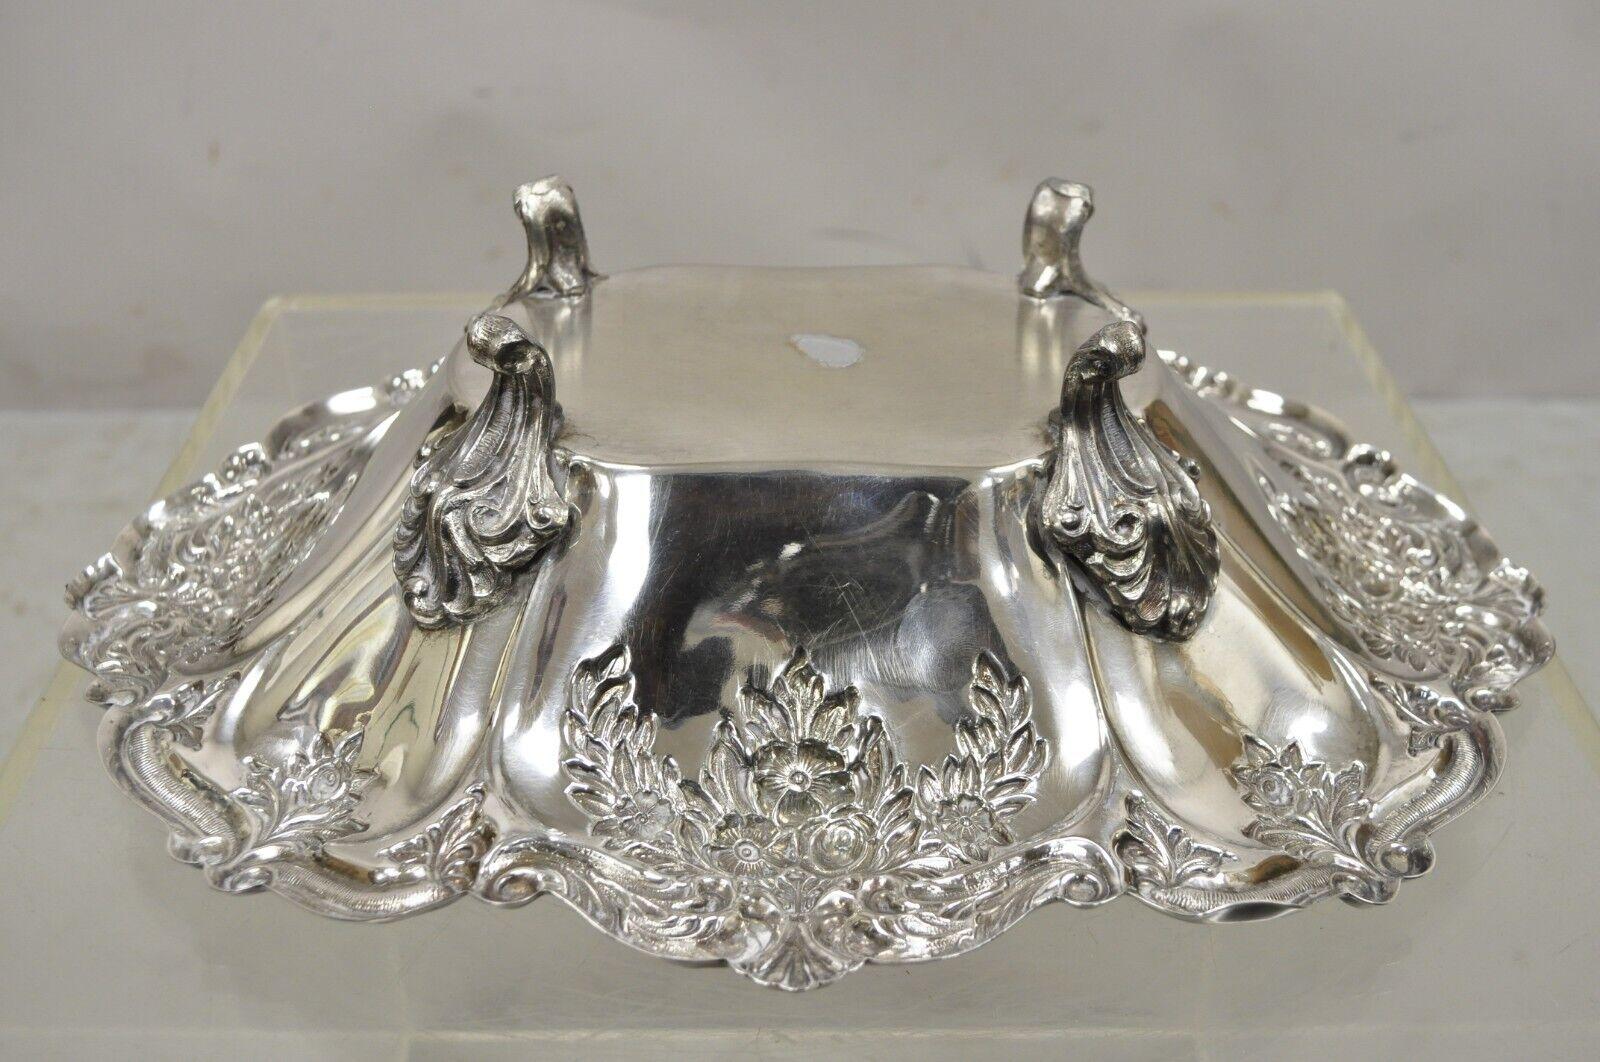 Victorian Silver Plated Floral Repousse Trinket Dish Serving Bowl Platter For Sale 4